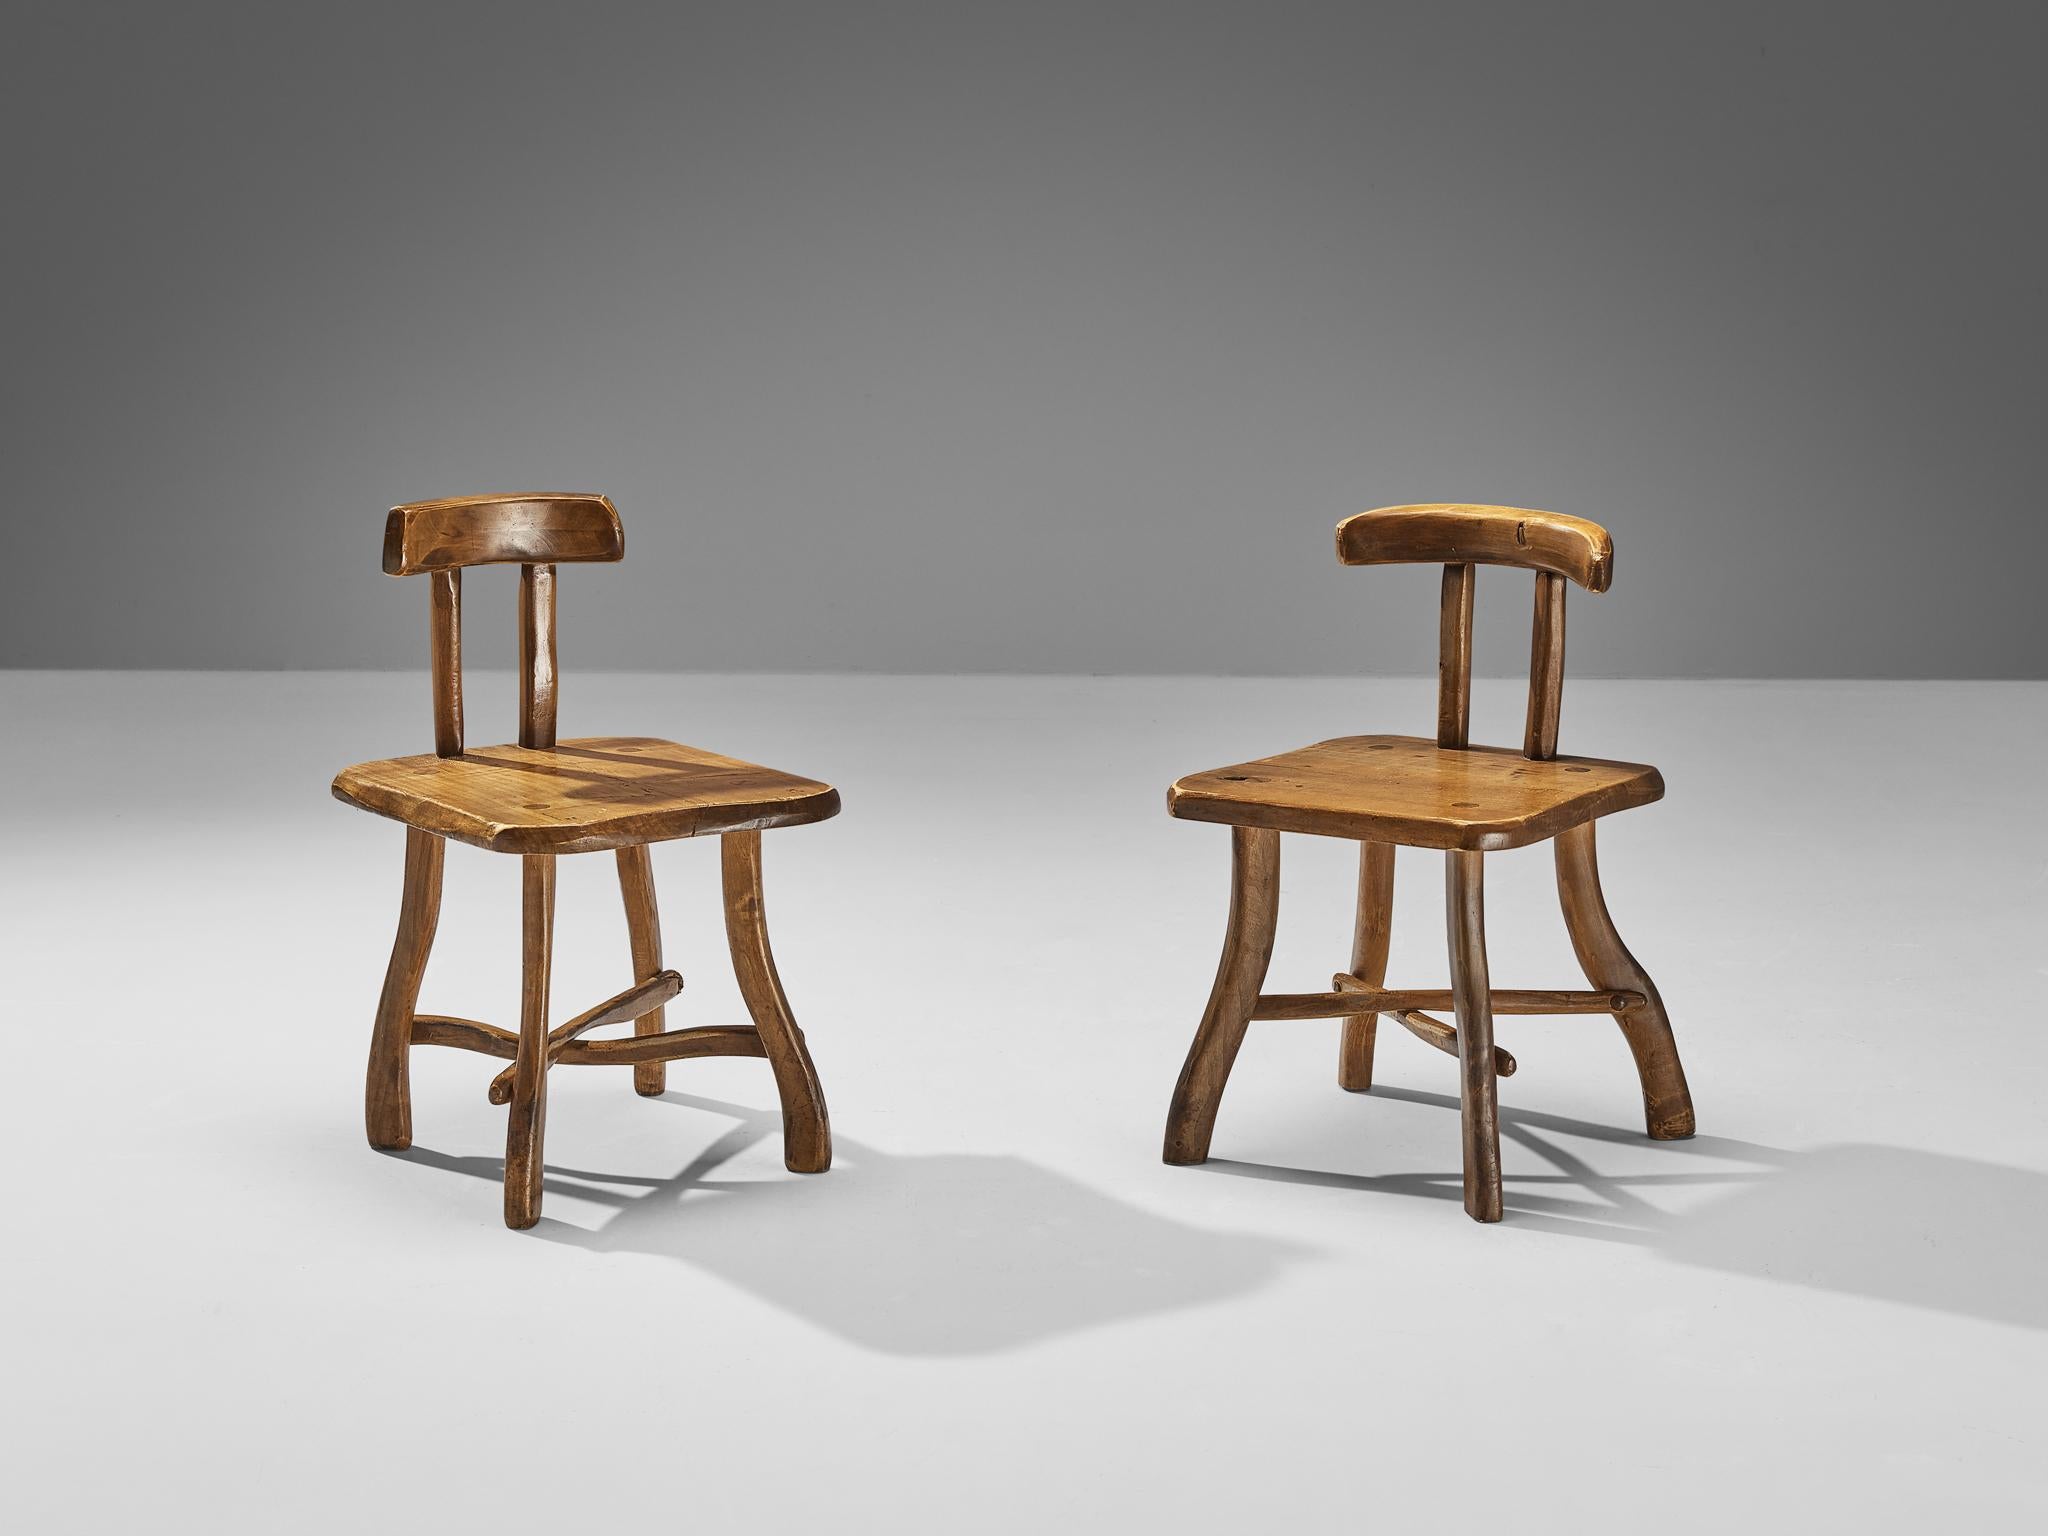 Brutalist chairs, maple, Europe 1960s 

Beautiful and naturalistic chairs made in Europe in the 1960s. The backrest of these pieces consists of a large piece of maple wood. Another slab is used for the seat. These chairs have a subtle cross-shape